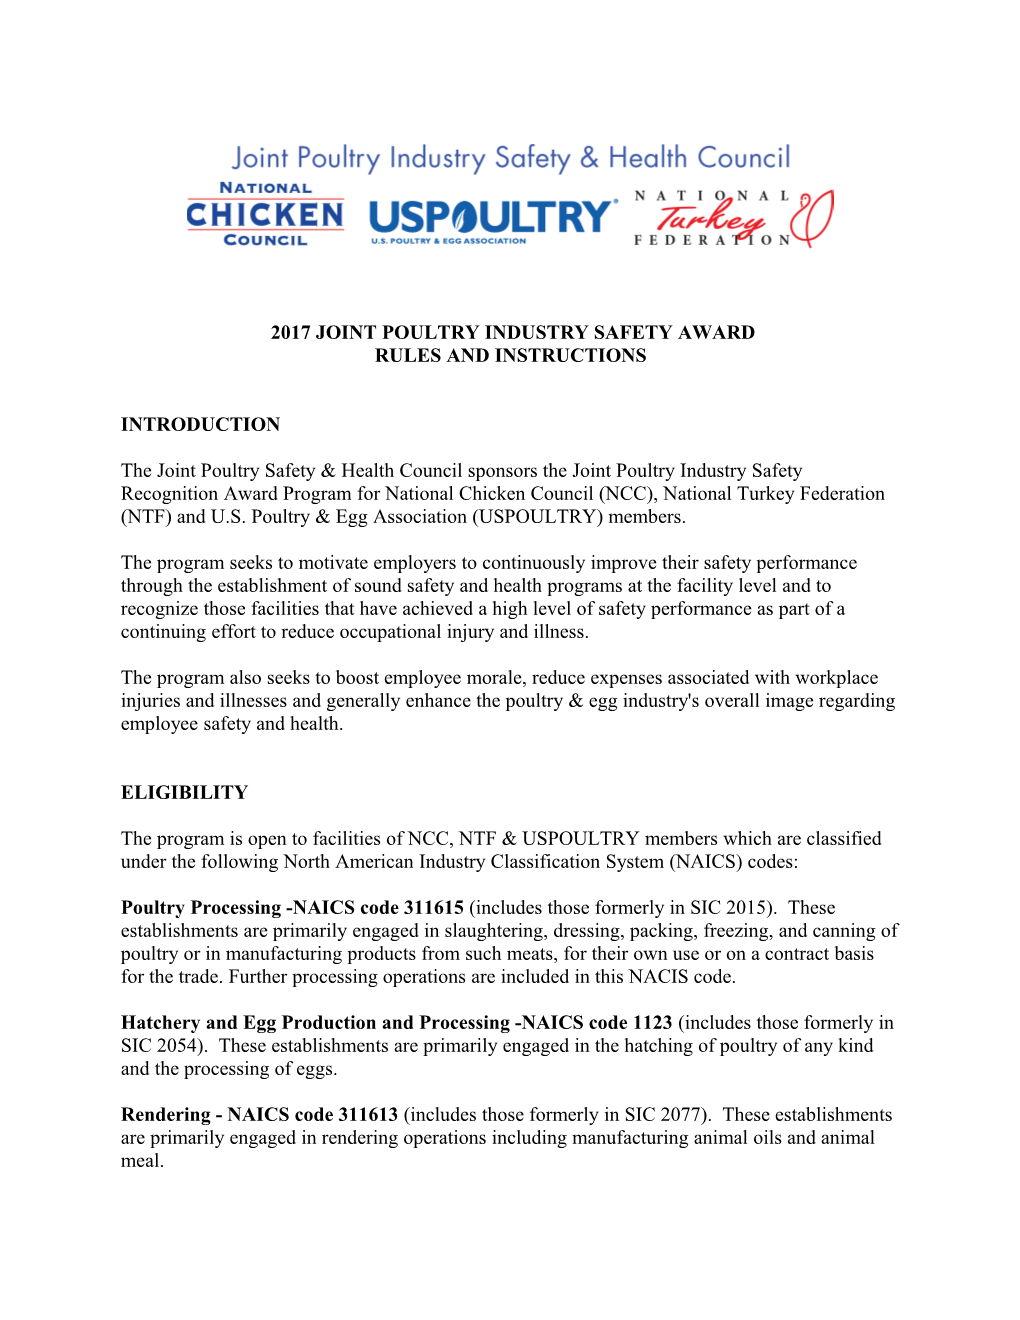 2017 Joint Poultry Industry Safety Award